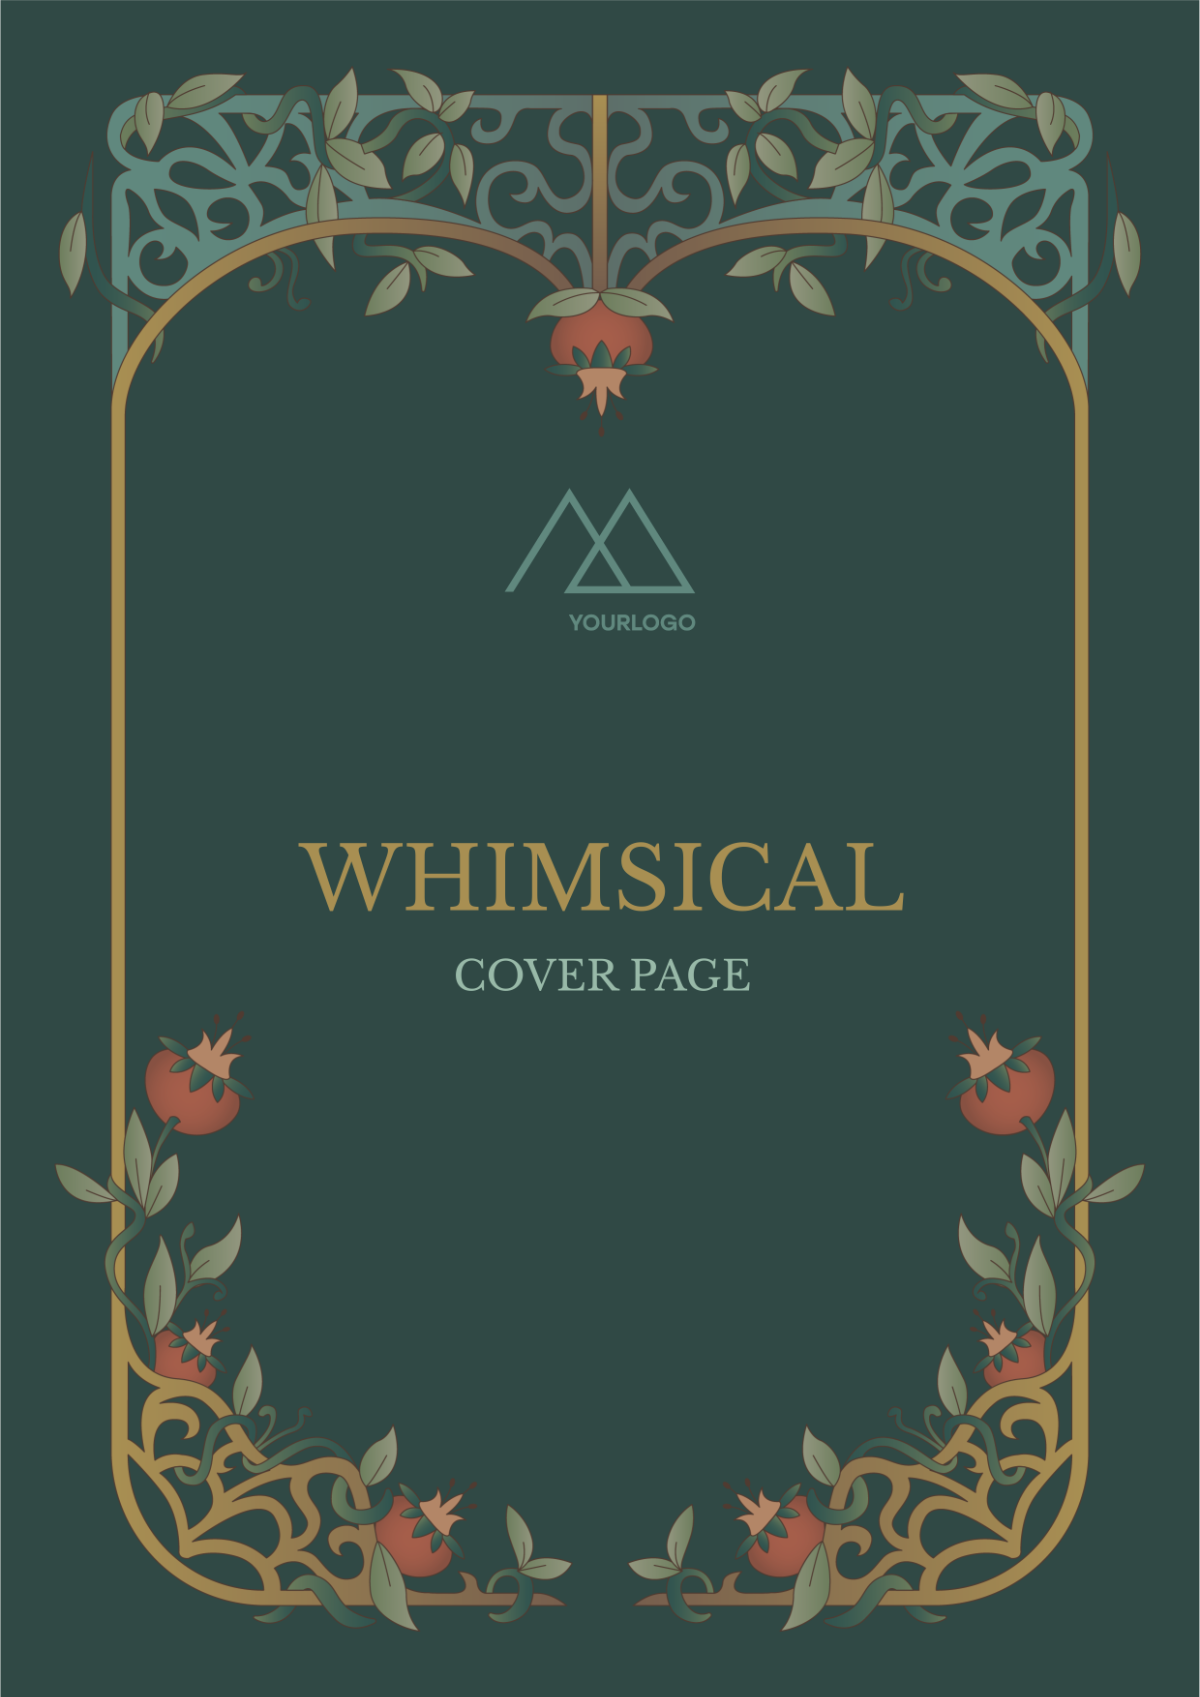 Whimsical Half Title Cover Page Template